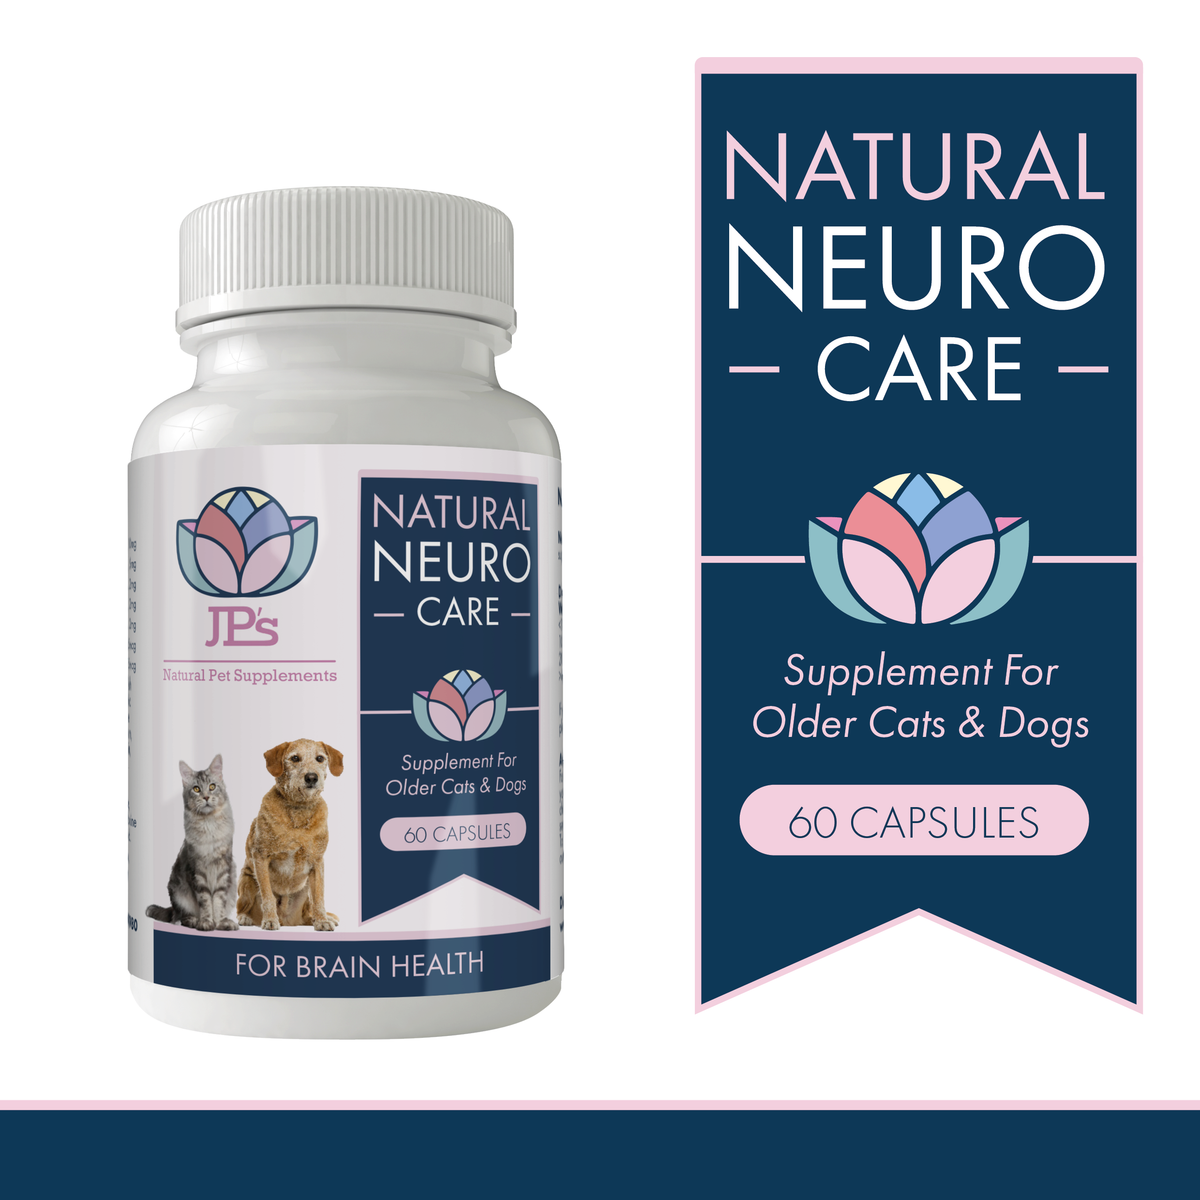 Natural neuro care supplement for older cats &amp; dogs